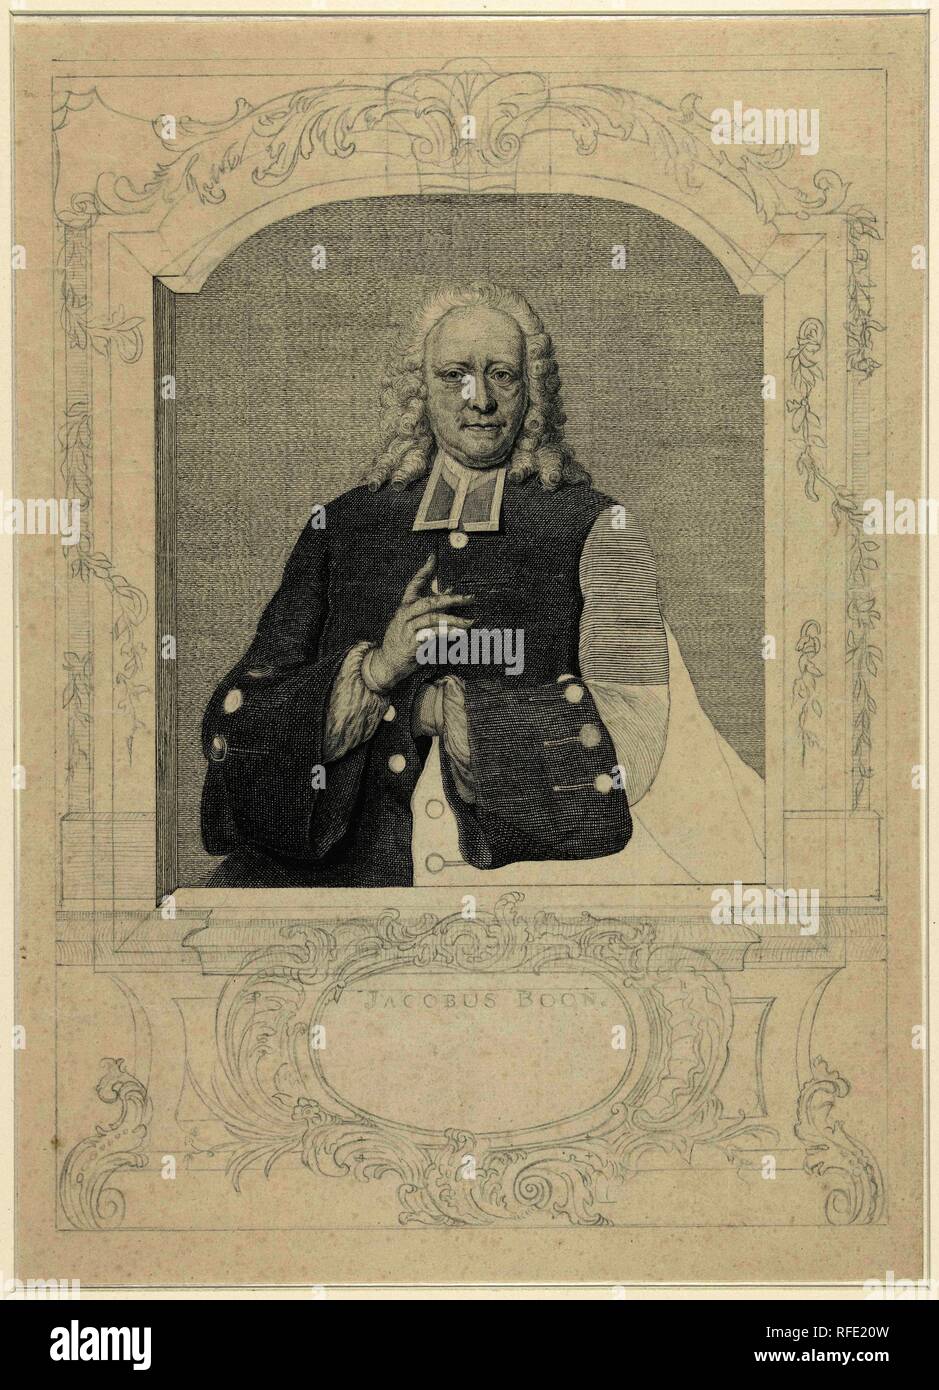 Portrait of Jacobus Boon. Draughtsman: Pieter Tanjé. After Jan Maurits Quinkhard. Dating: 1716 - 1761. Measurements: h 378 mm × w 217 mm. Museum: Rijksmuseum, Amsterdam. Stock Photo